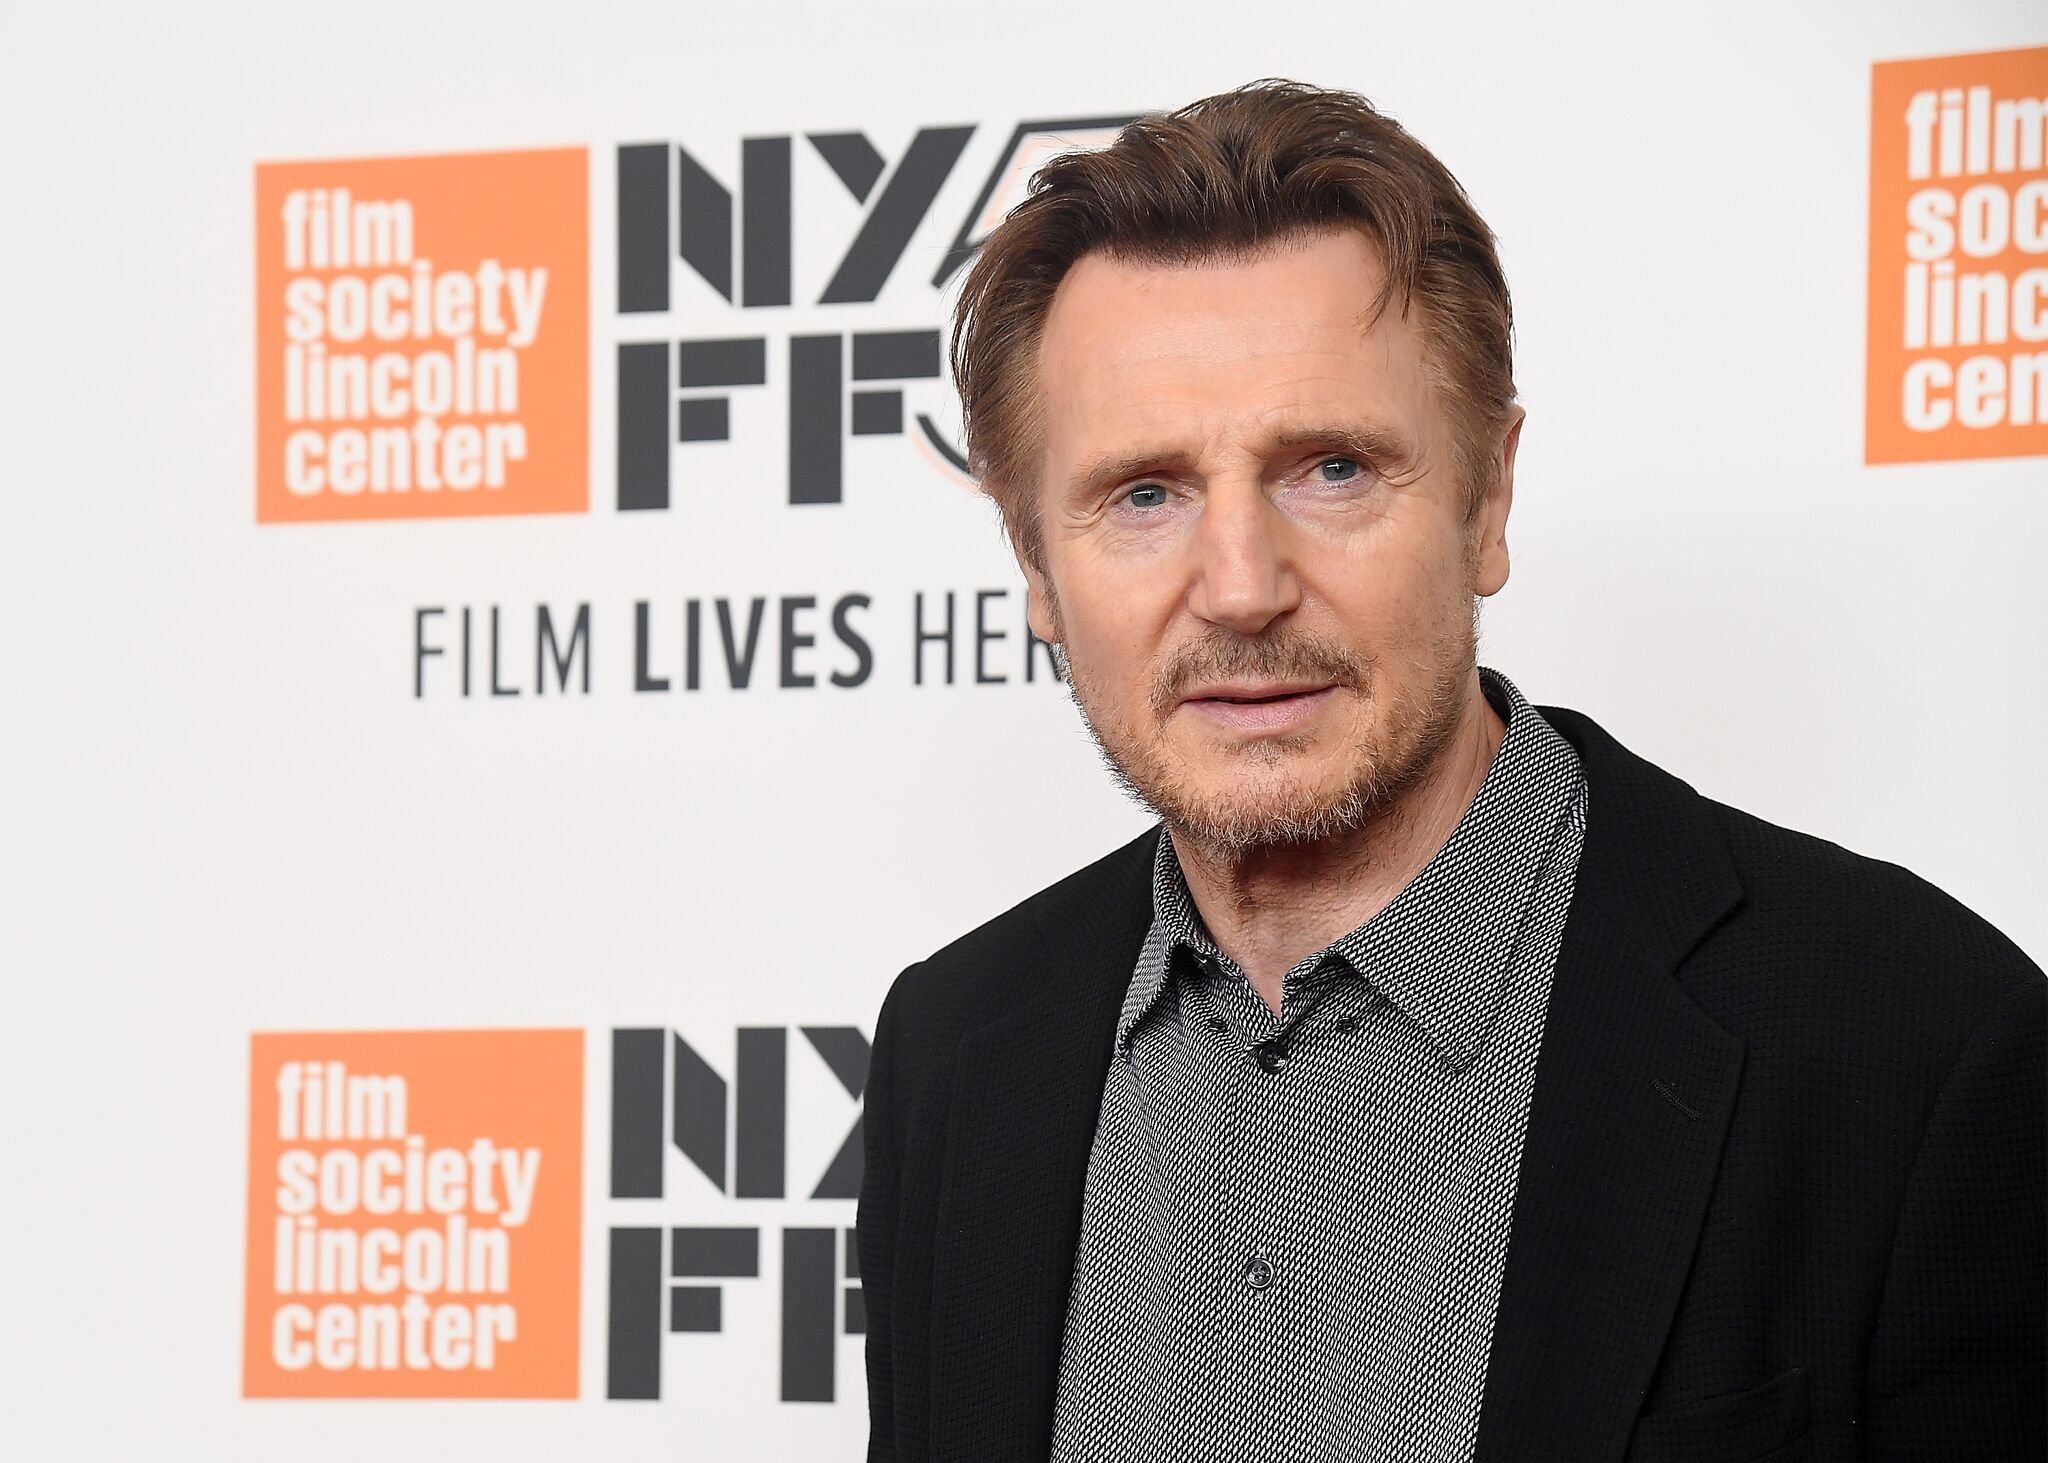  Liam Neeson at the screening of "The Ballad of Buster Scruggs" | Getty Images